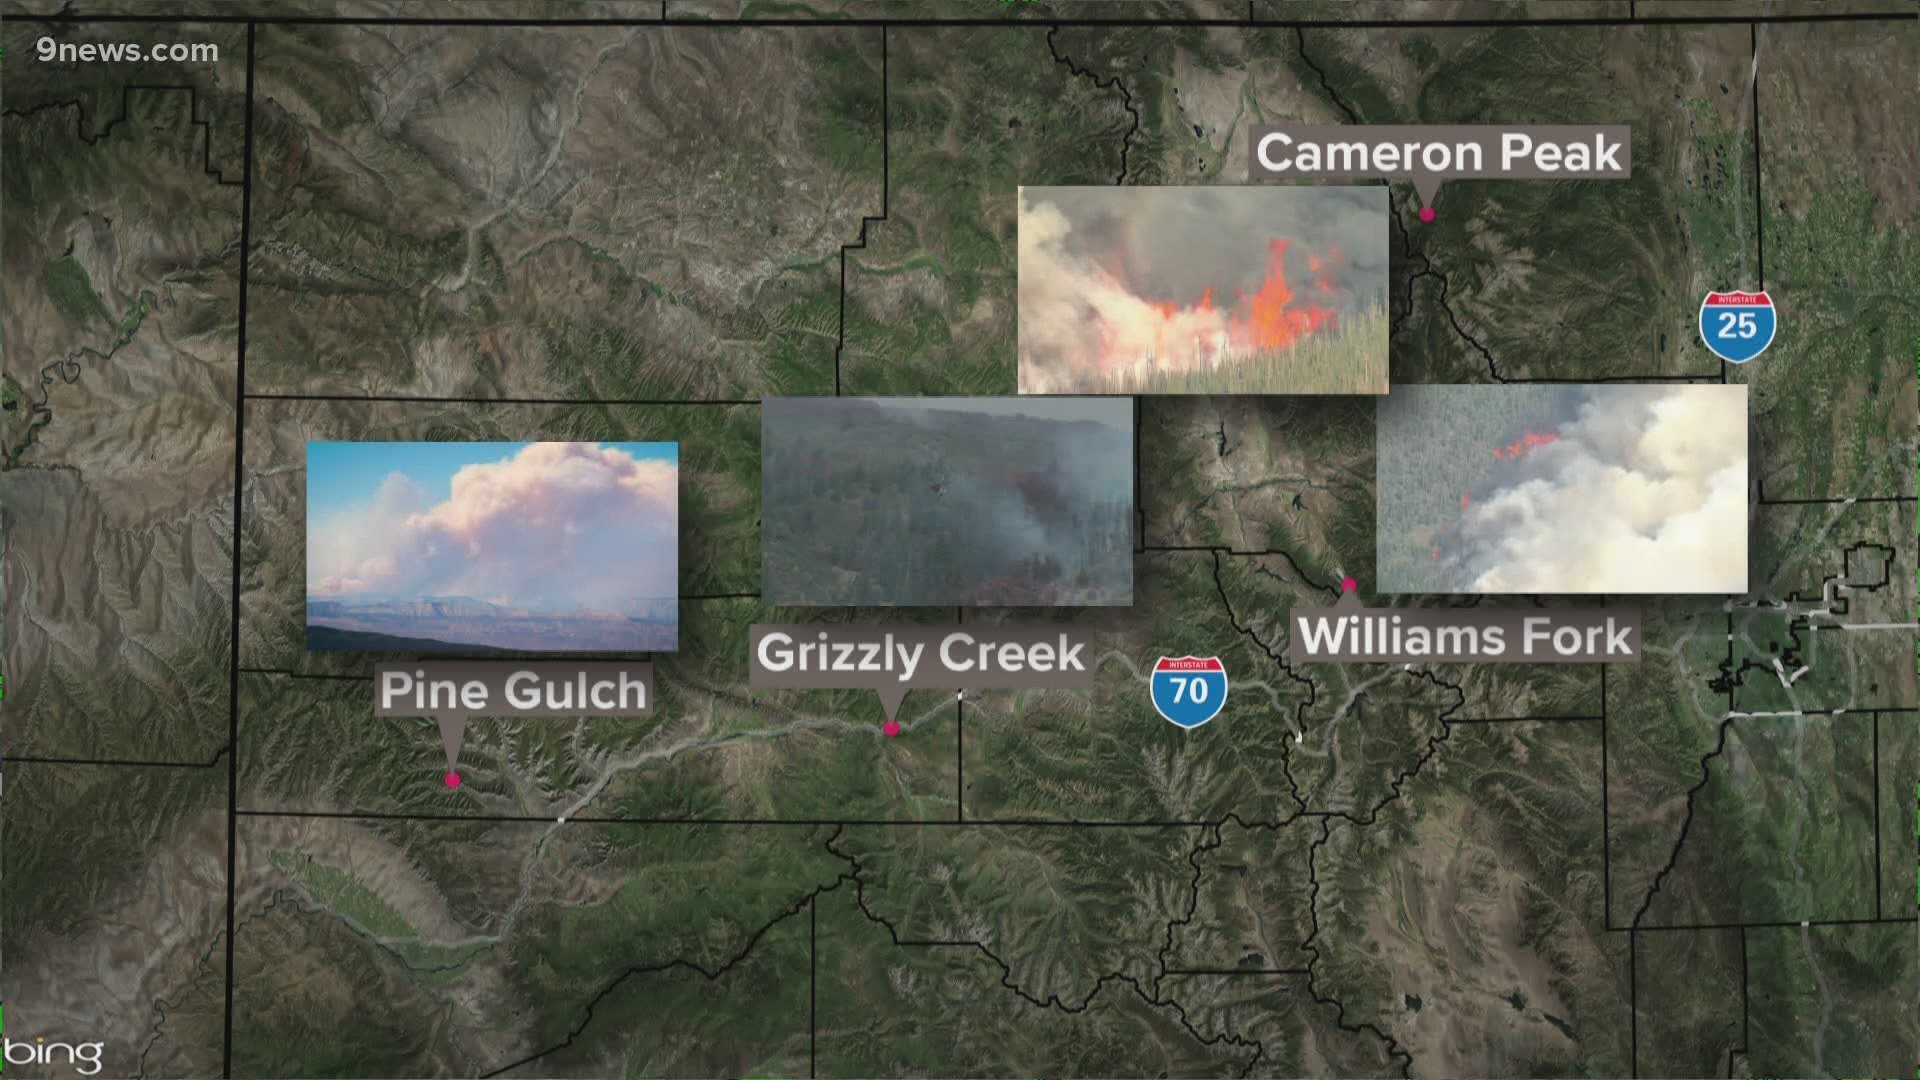 An August 19 update on all the wildfires burning in Colorado right now.